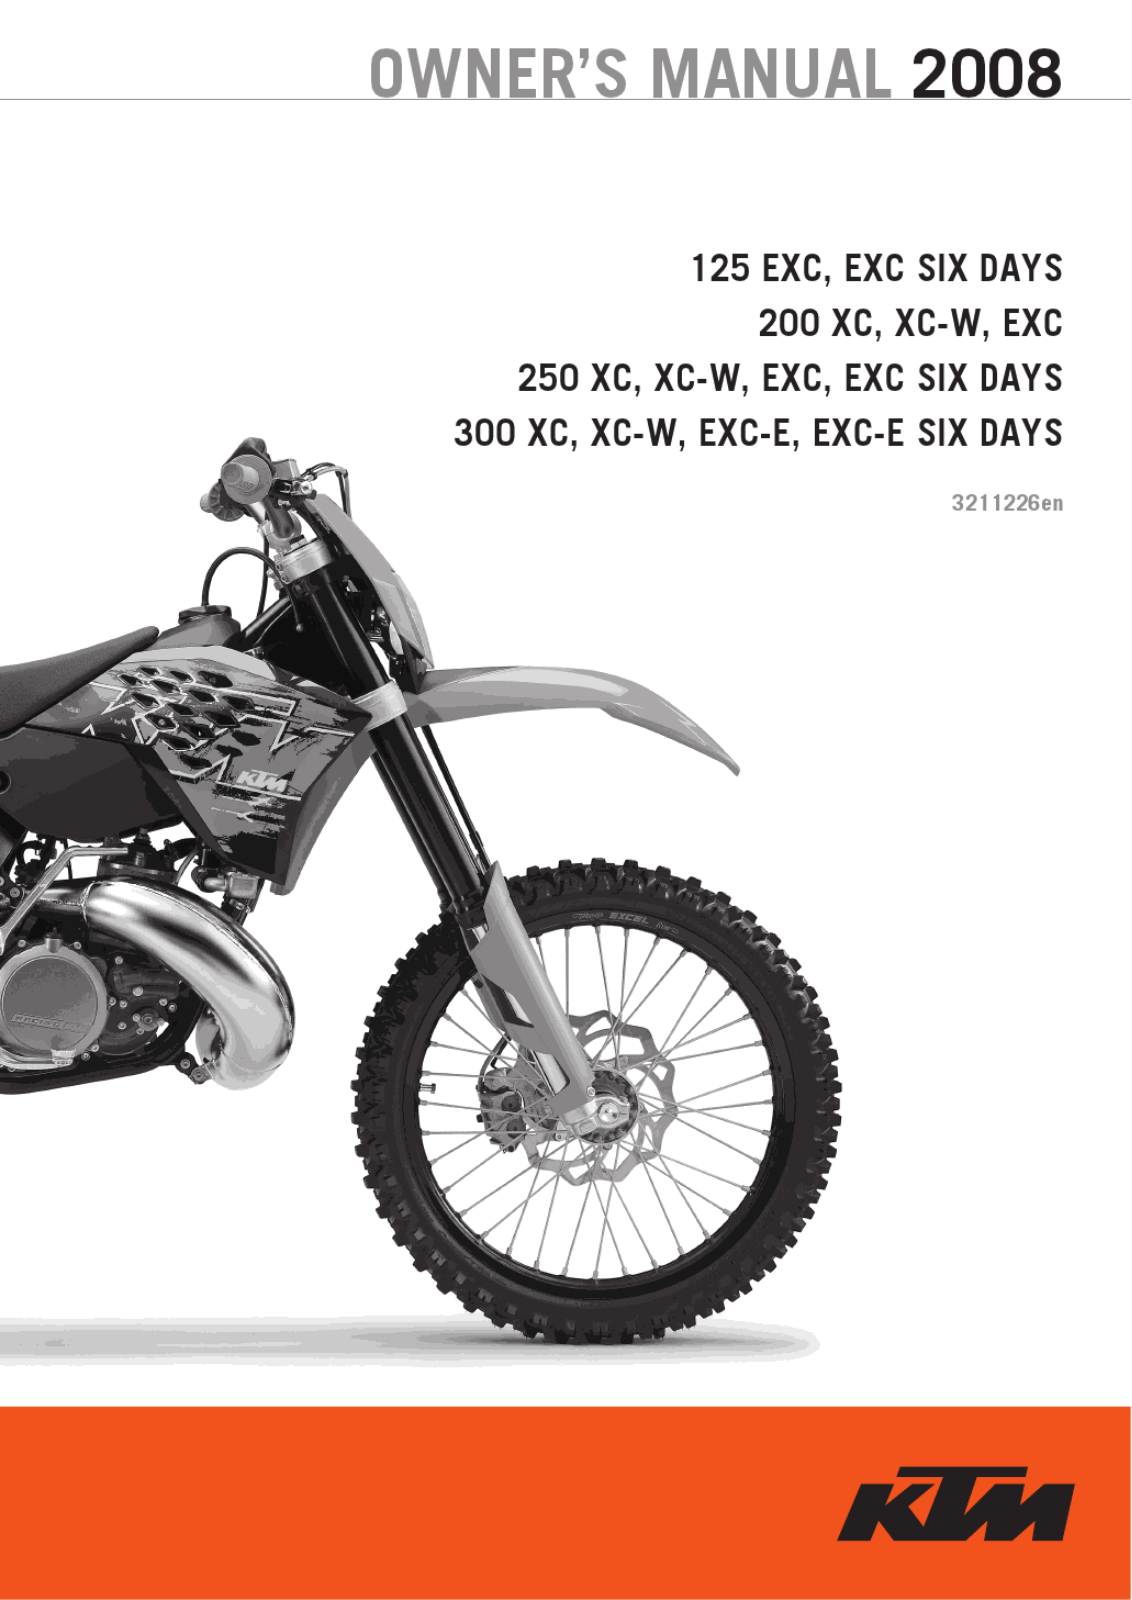 KTM 125 EXC 2008, 200XC 2008, 250 2008, 300 Six Days 2008 Owner's manual